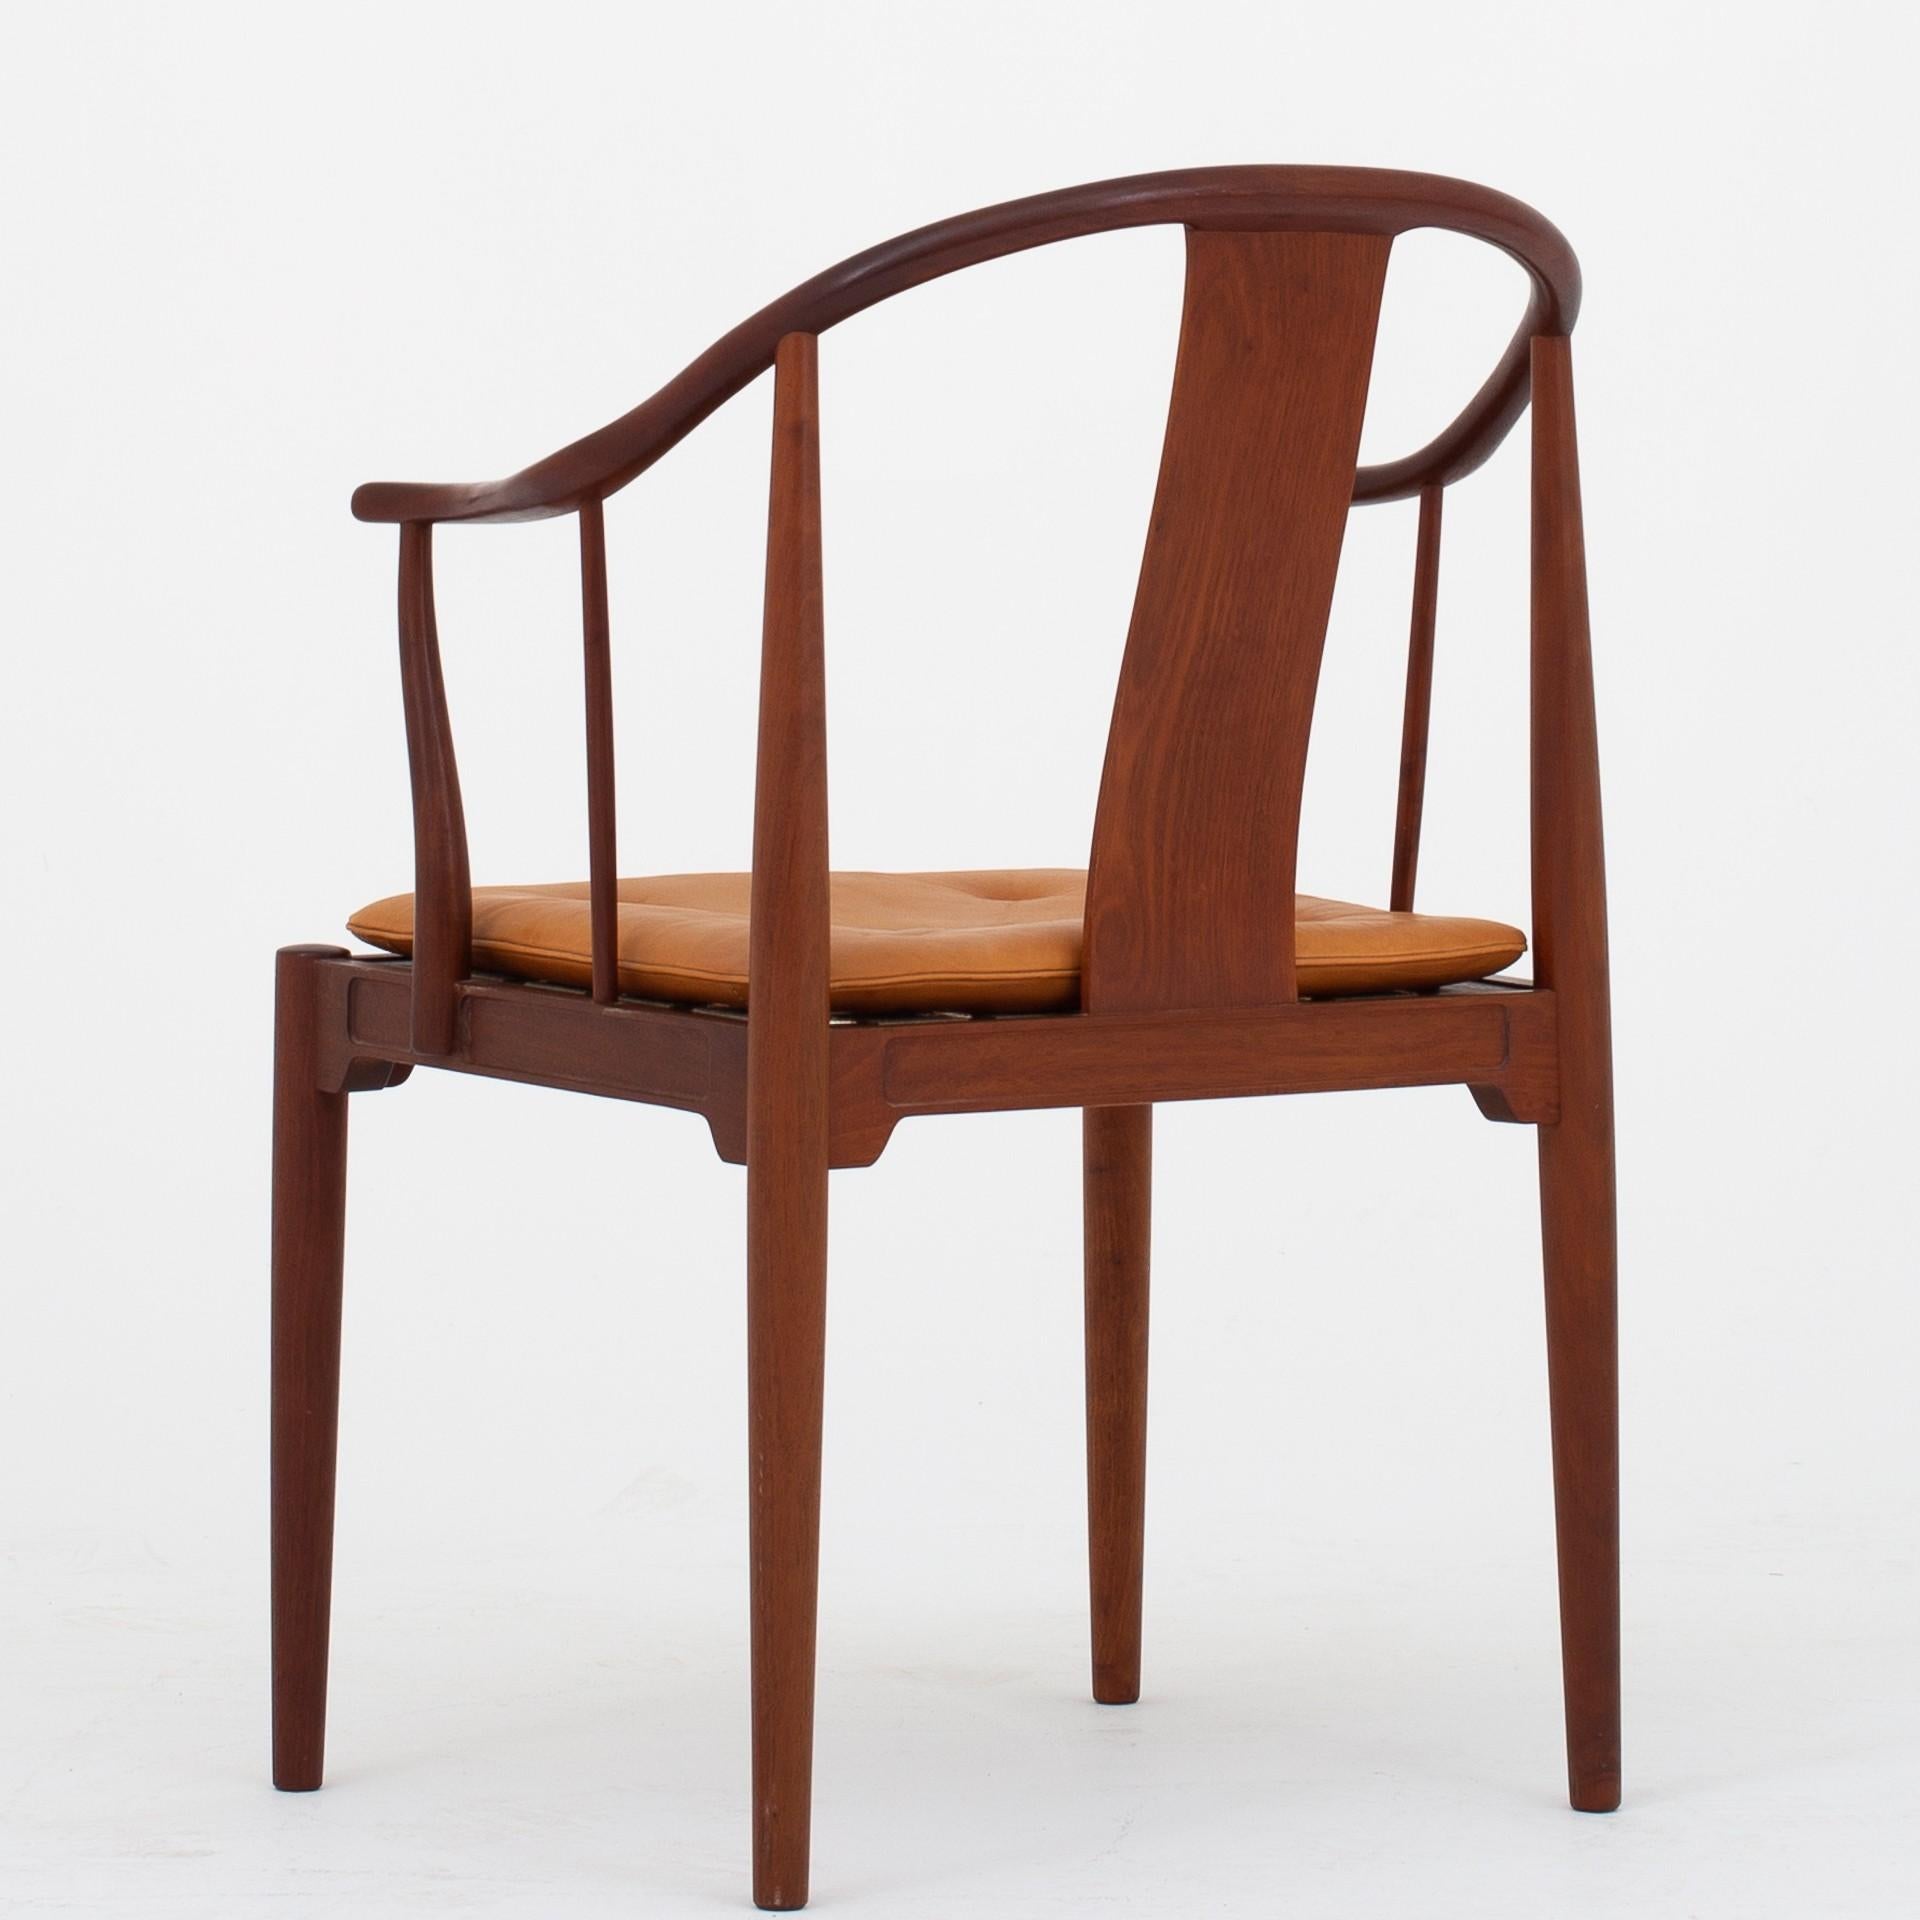 FH 4282 - China chair in Cuban mahogany with cushion of patinated natural leather. (Jubilee model no. 230/400) from 1975. Maker Fritz Hansen.